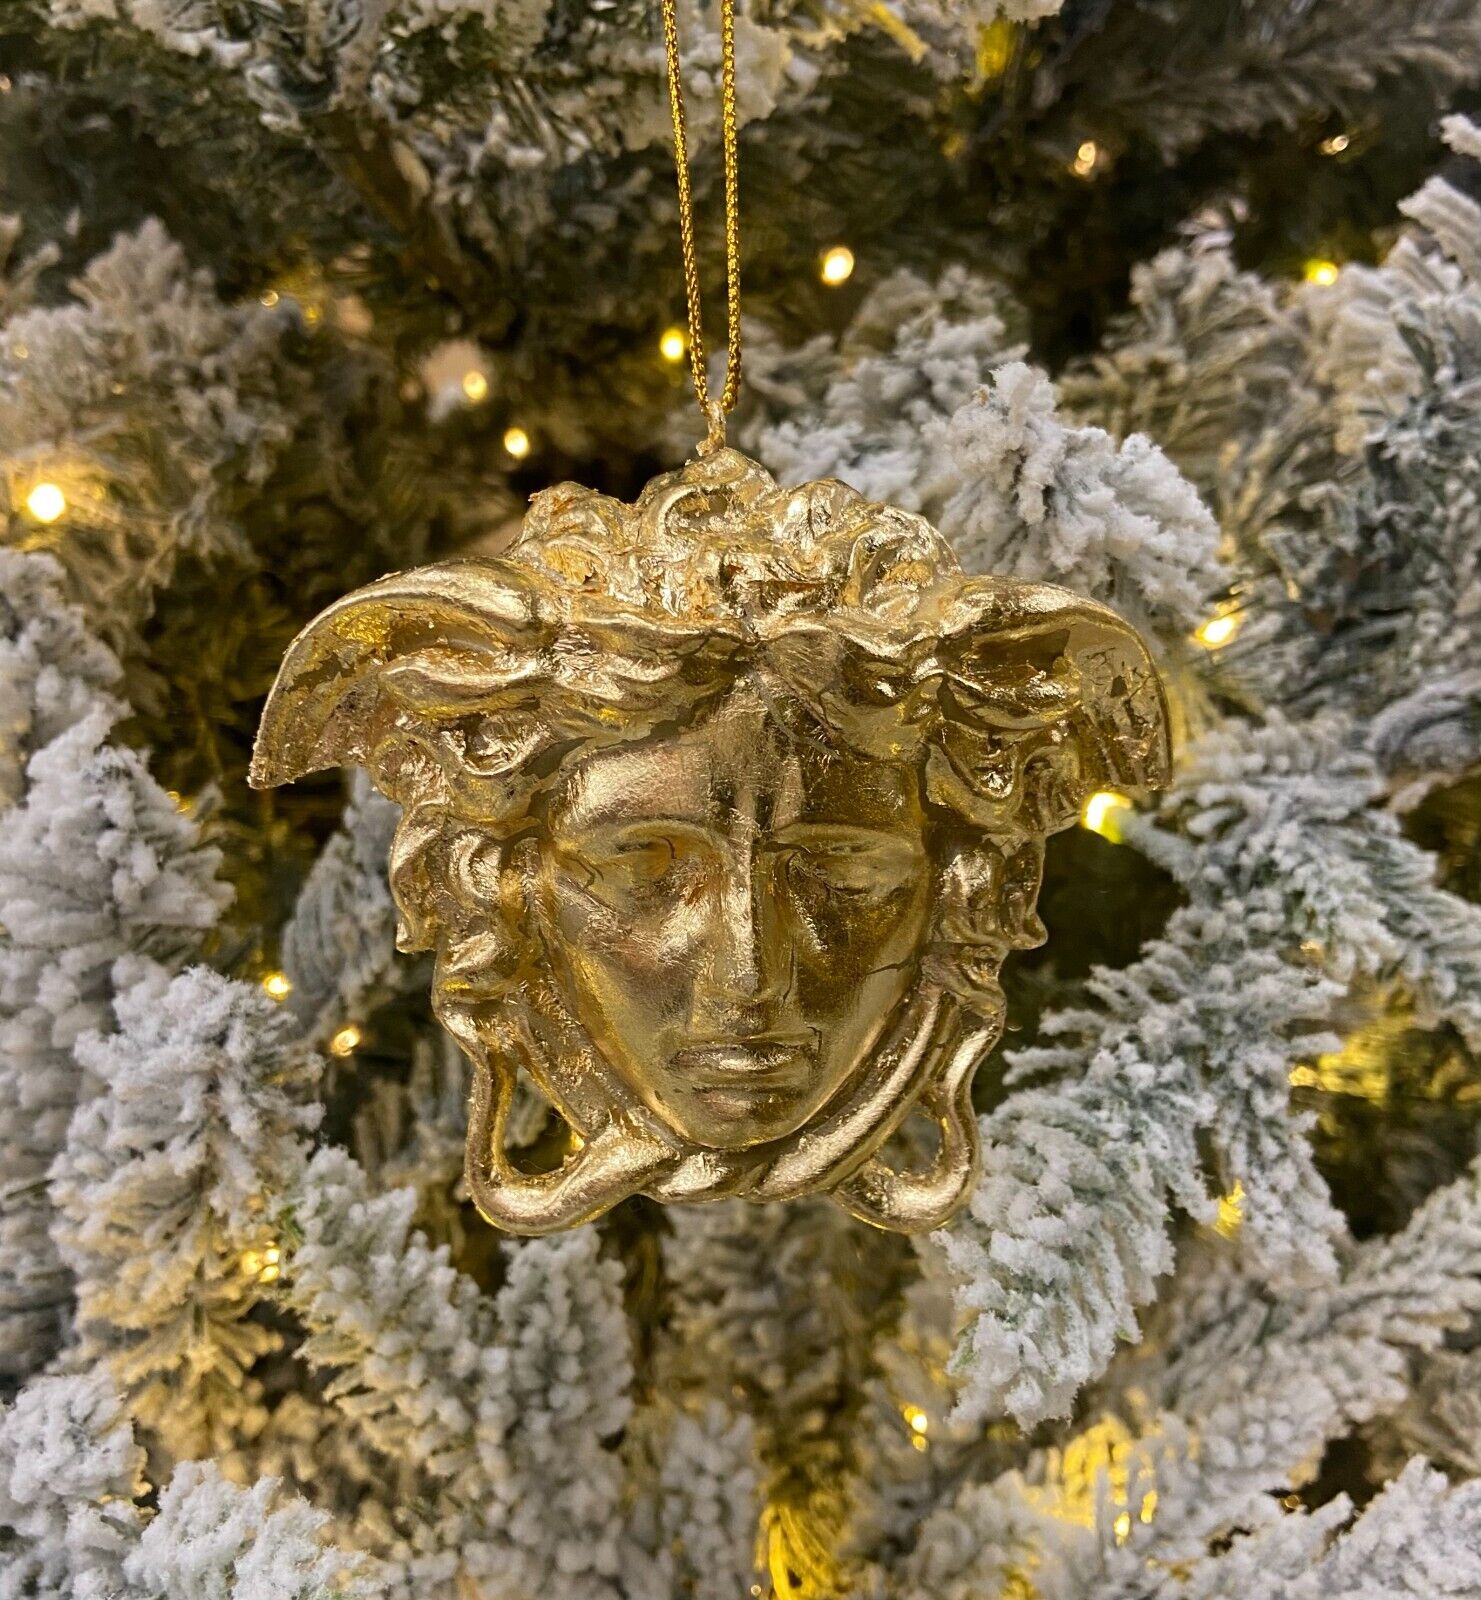 GOLD LEAF VERSACE STYLE MEDUSA LARGE 5 INCH ORNAMENT CHRISTMAS LUXURY HOME DECOR